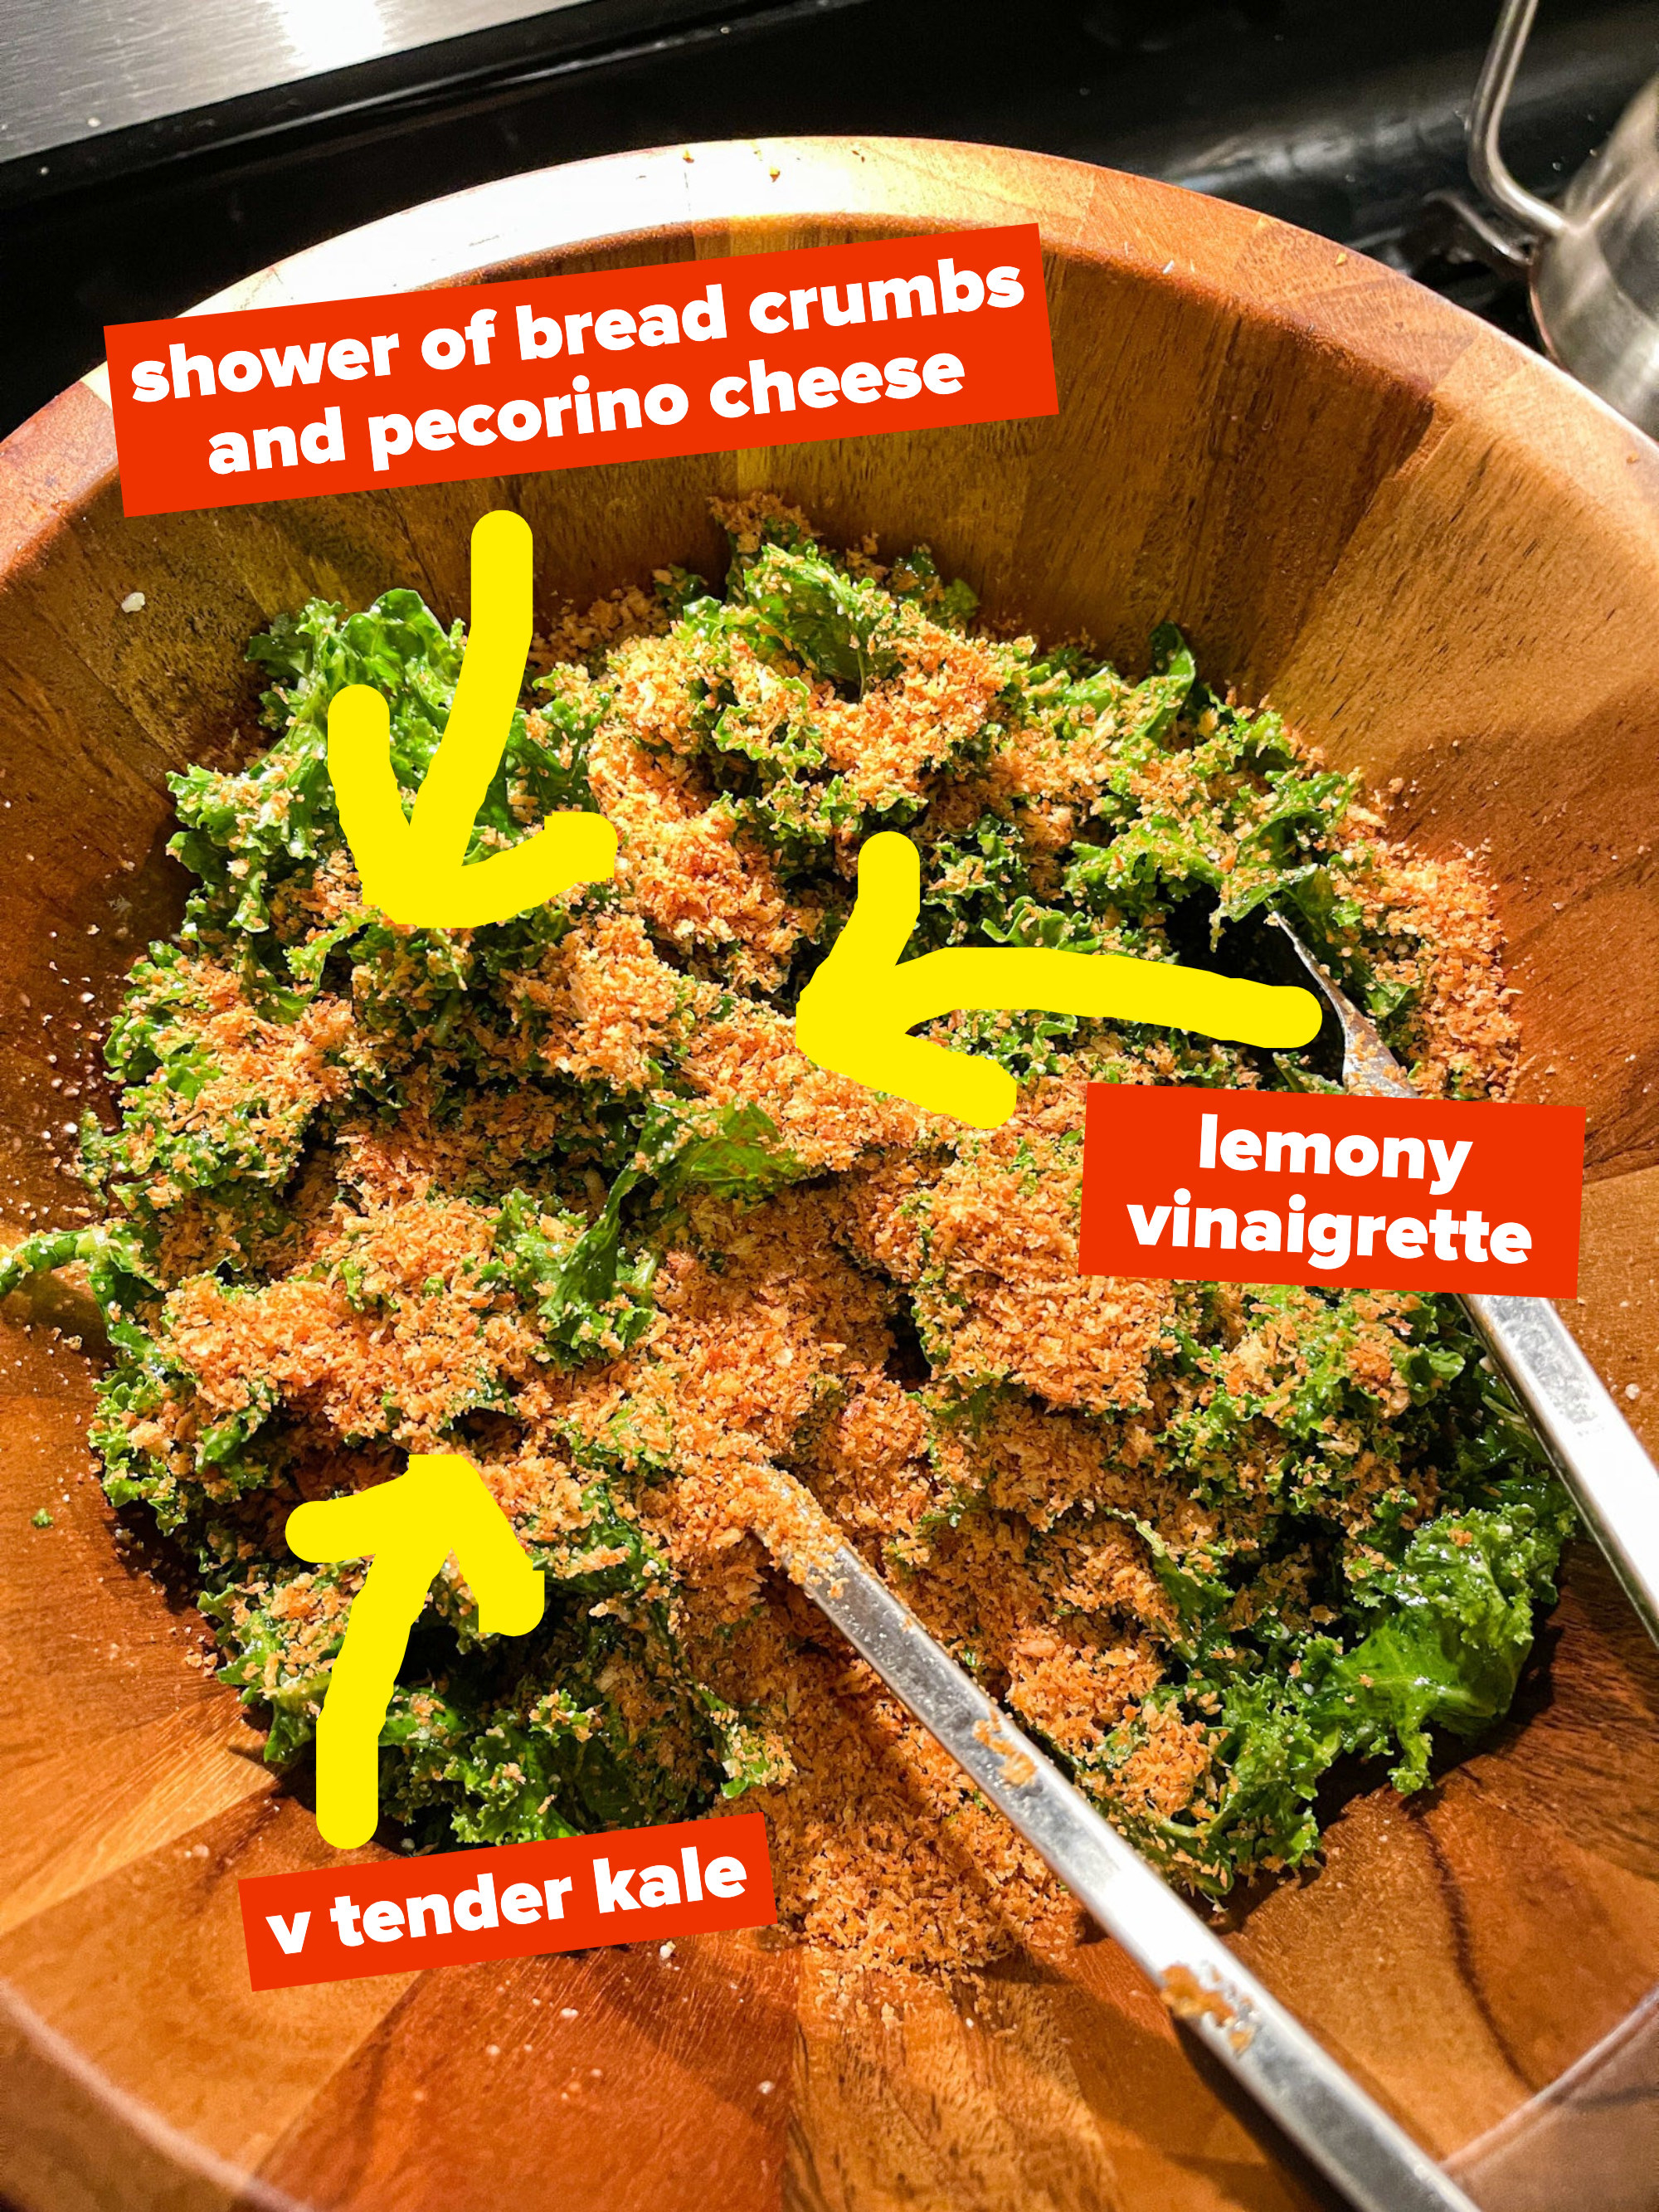 Salad with bread crumbs and pecorino cheese, a lemony vinaigrette, and very tender kale